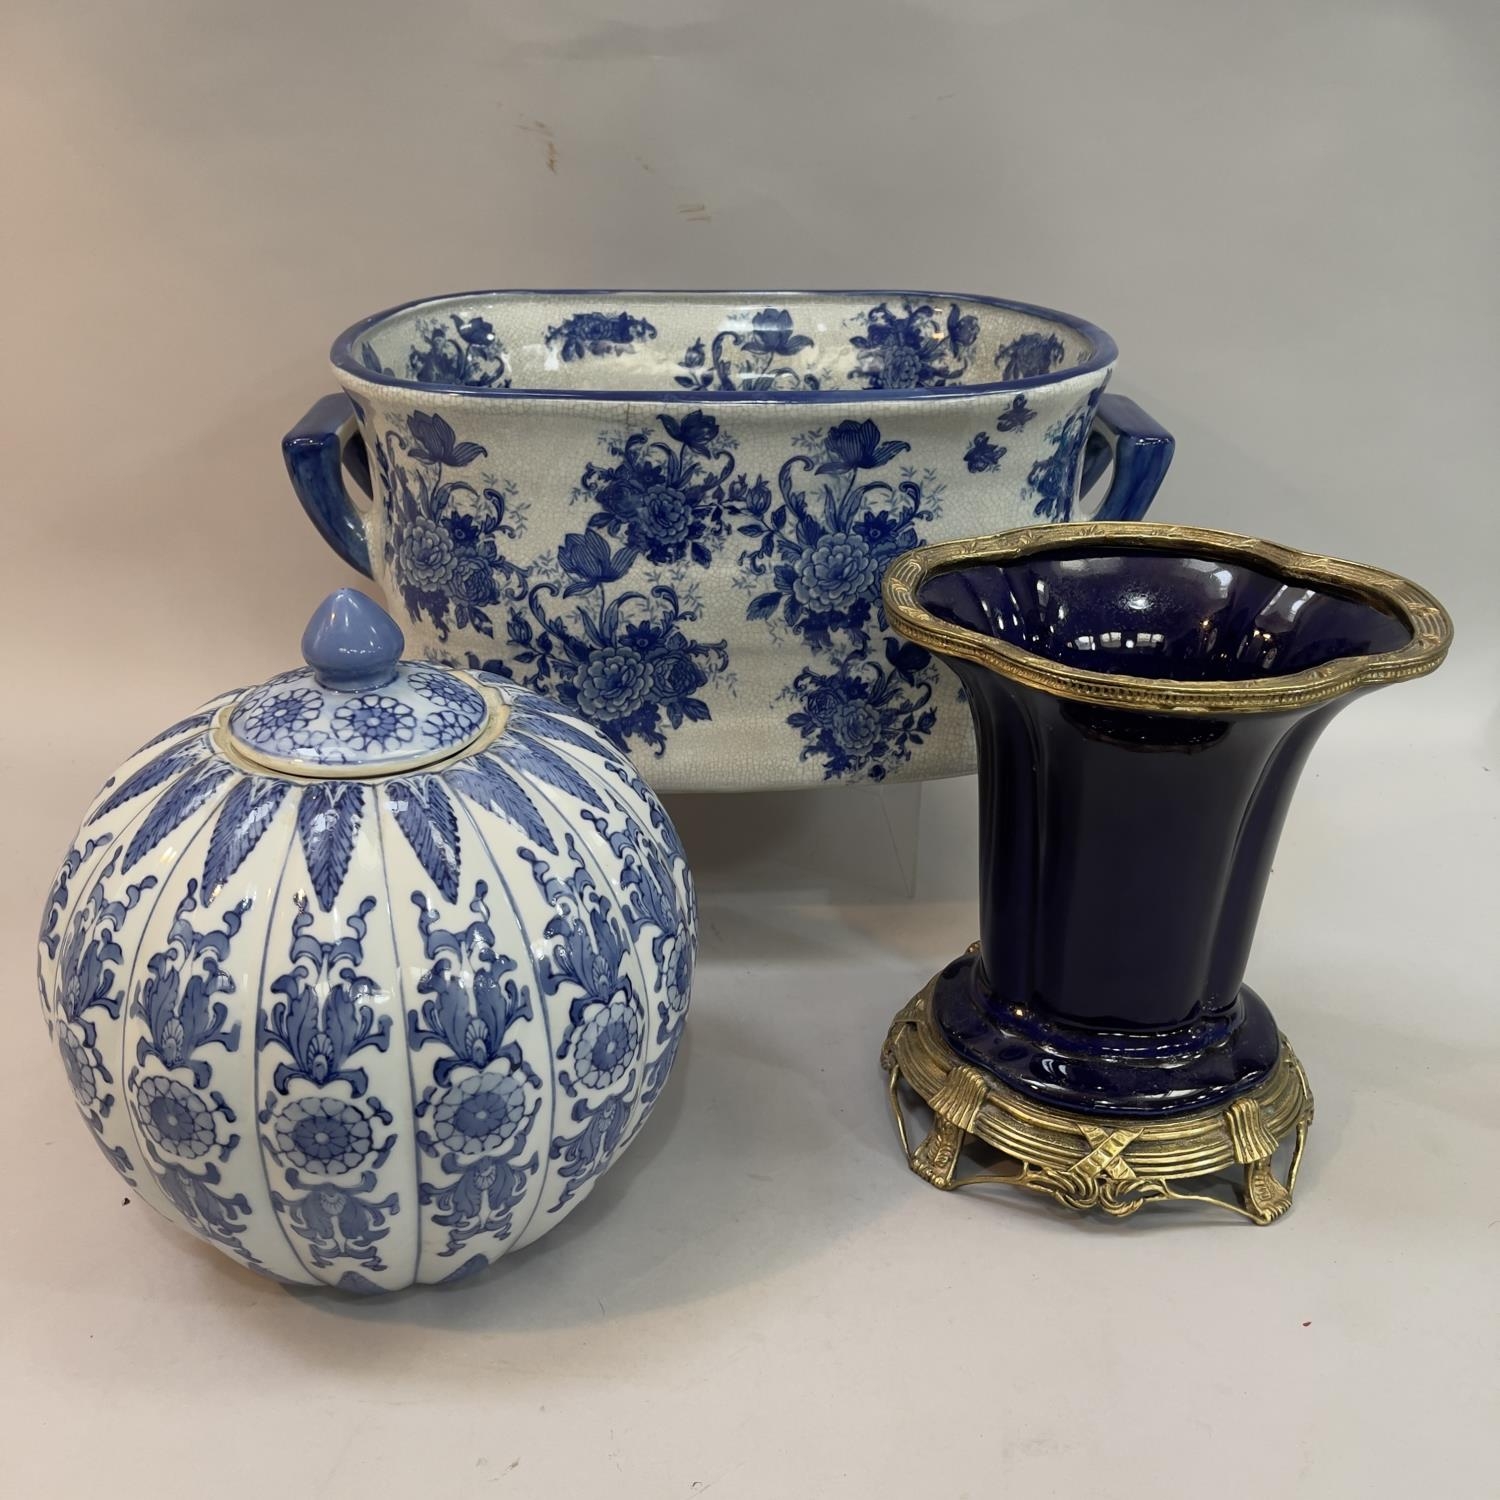 A reproduction blue and white two handled foot bath